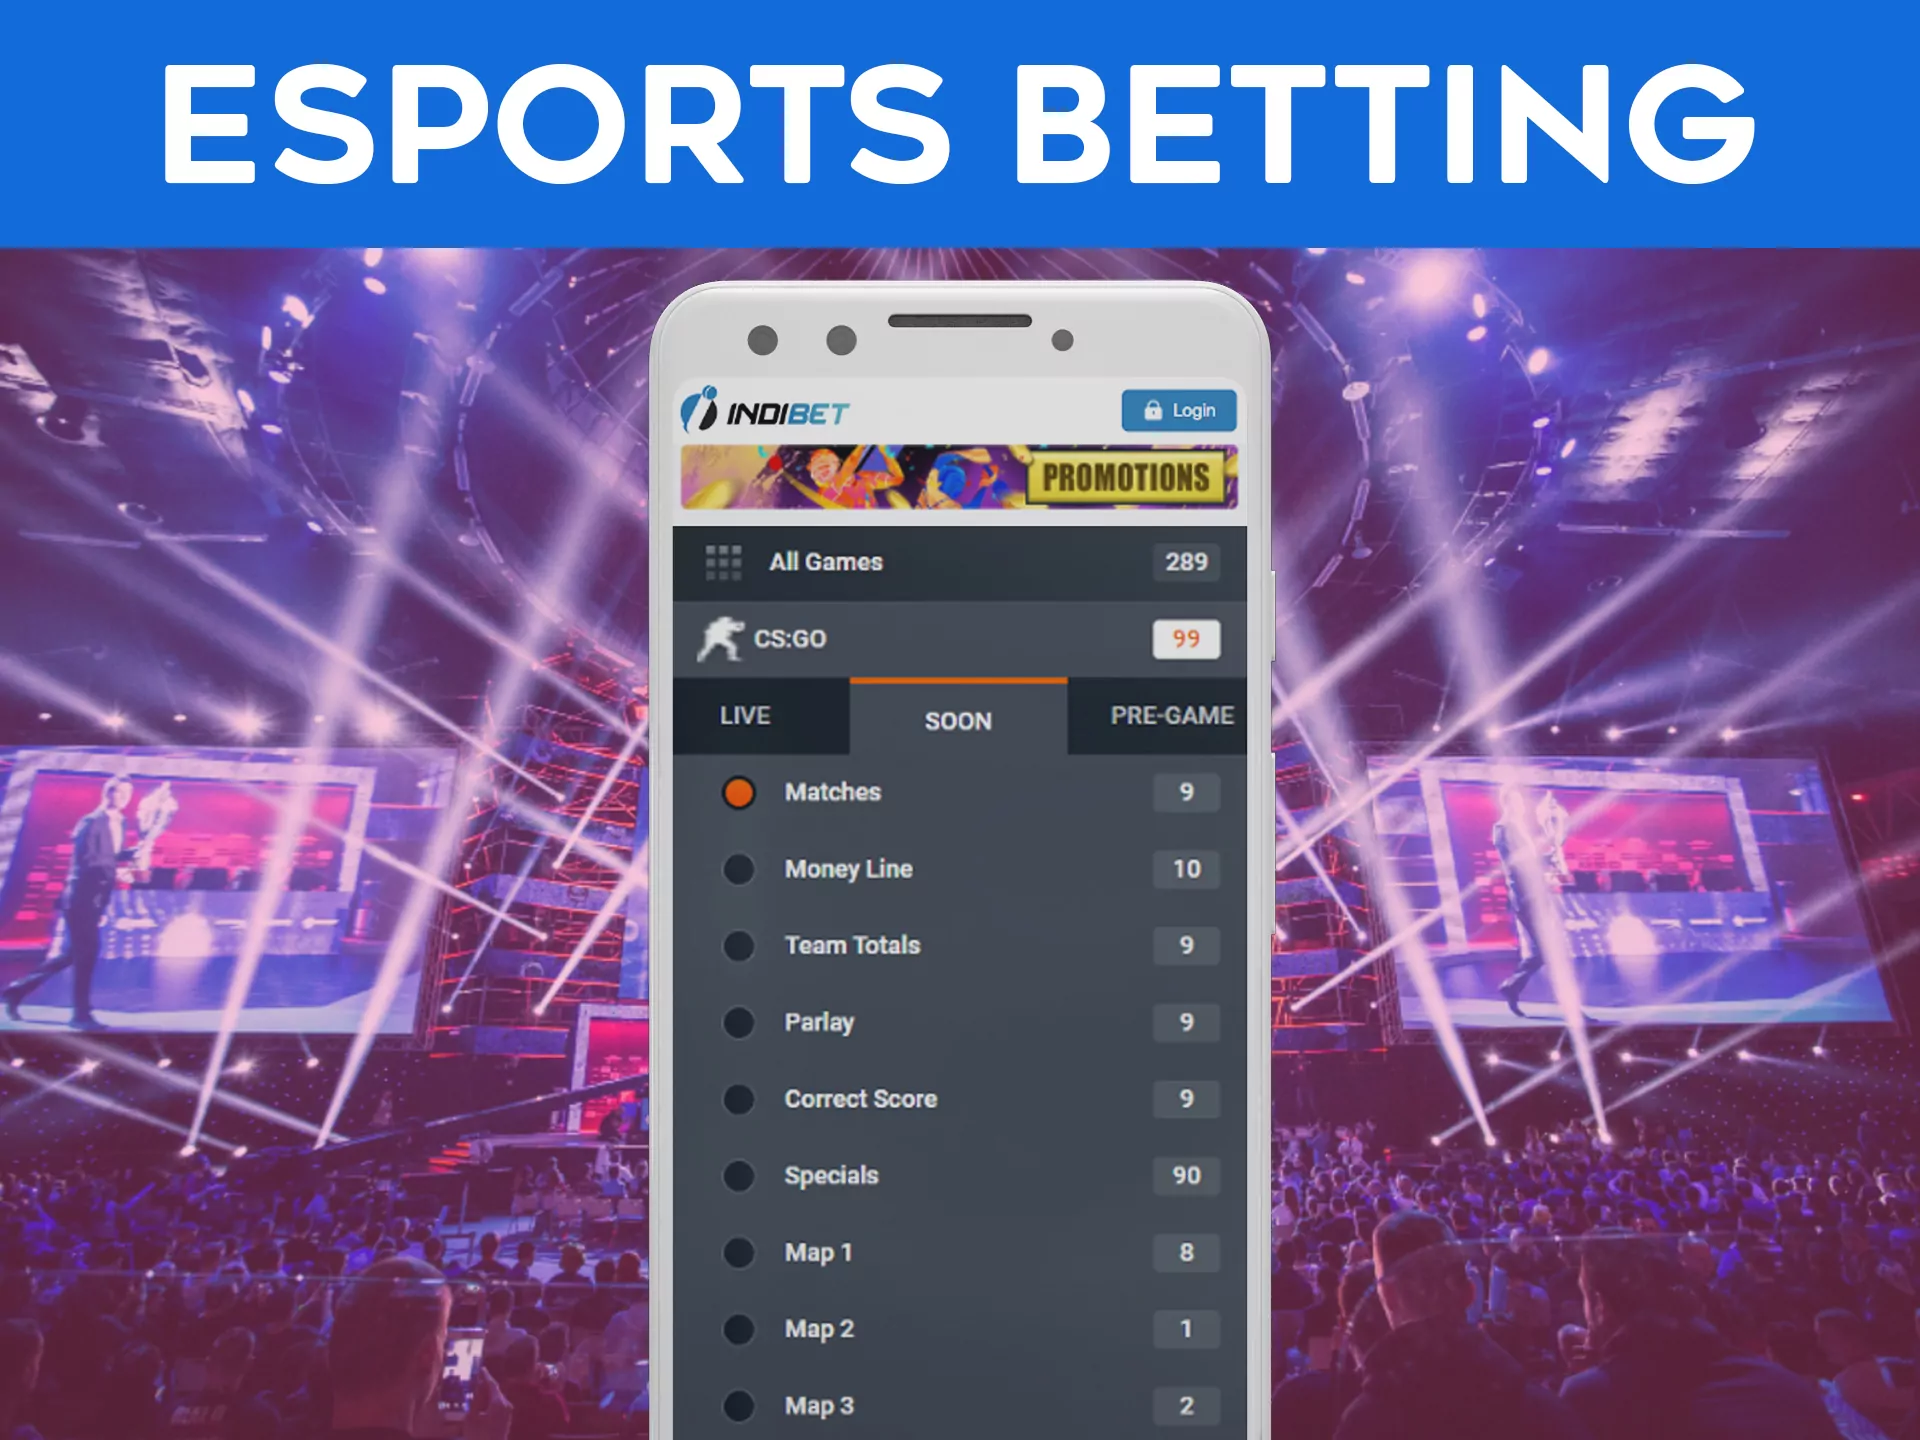 Esports betting is also available in the Indibet app.